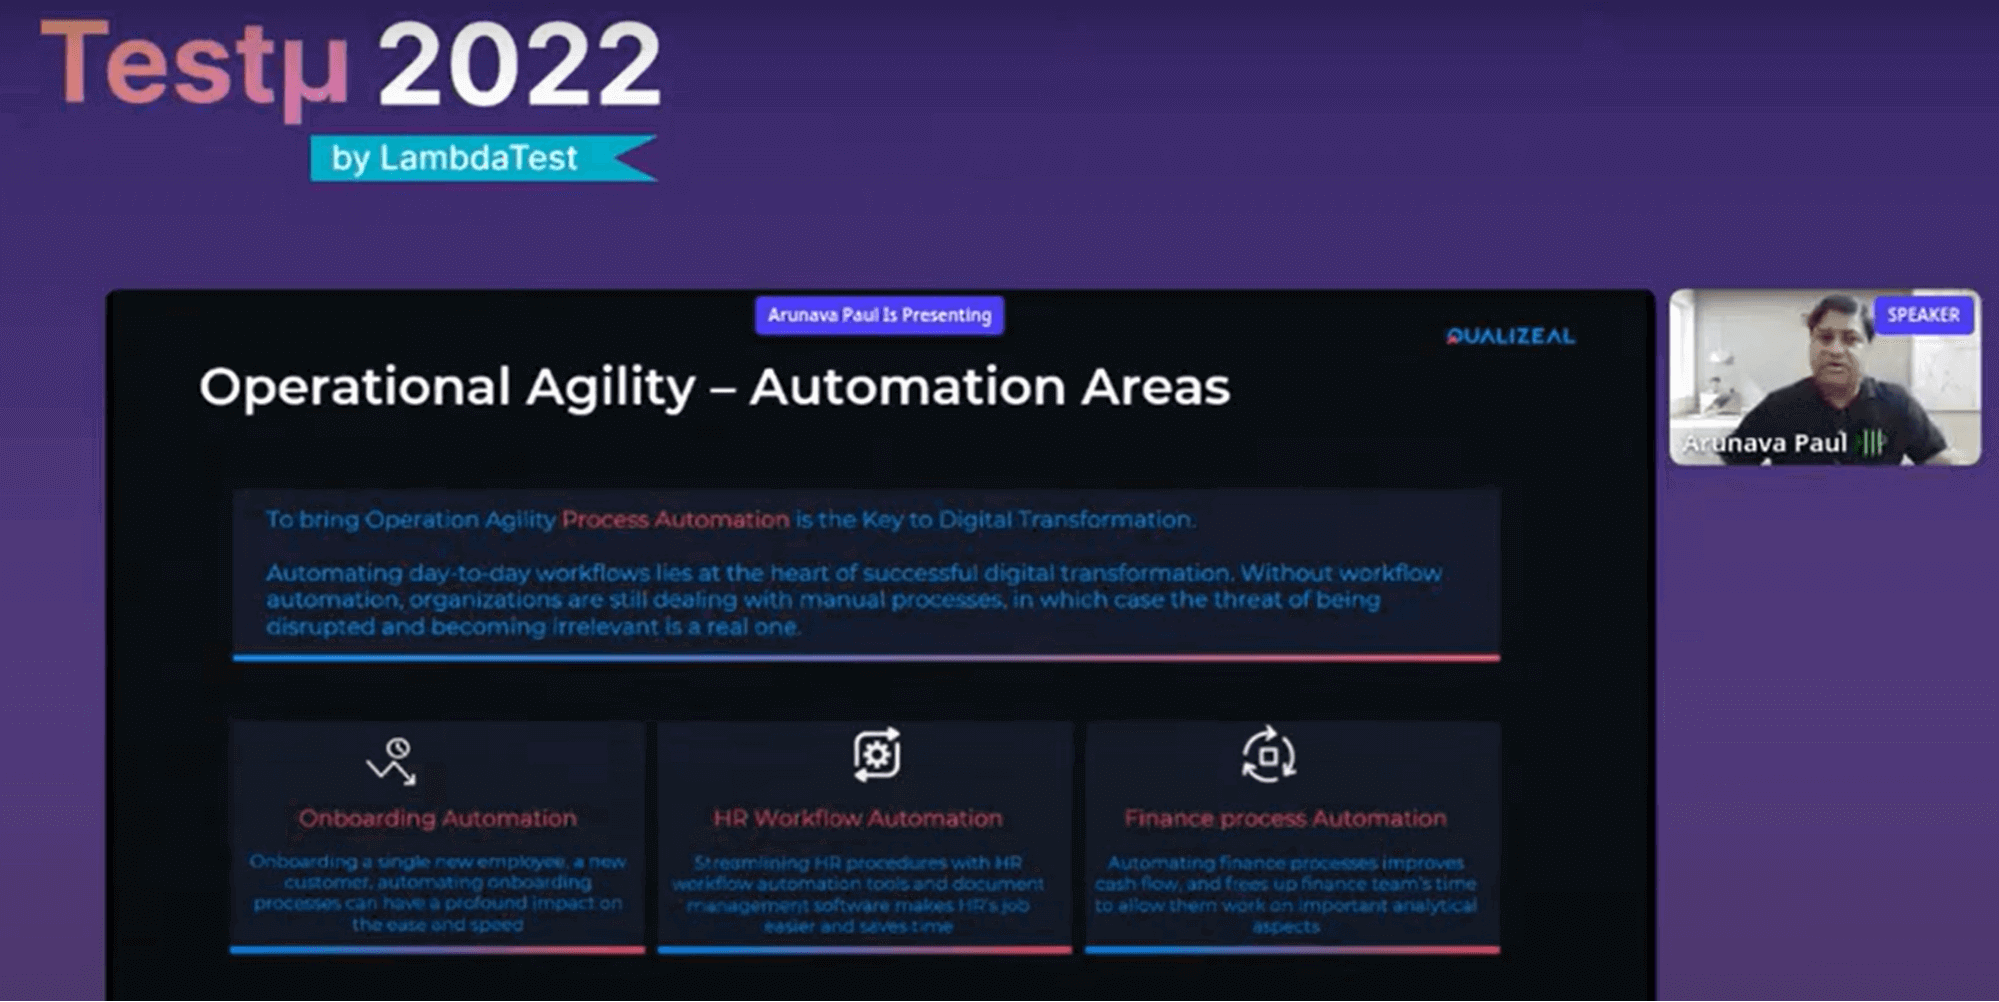 Operational Agility - Automation Areas